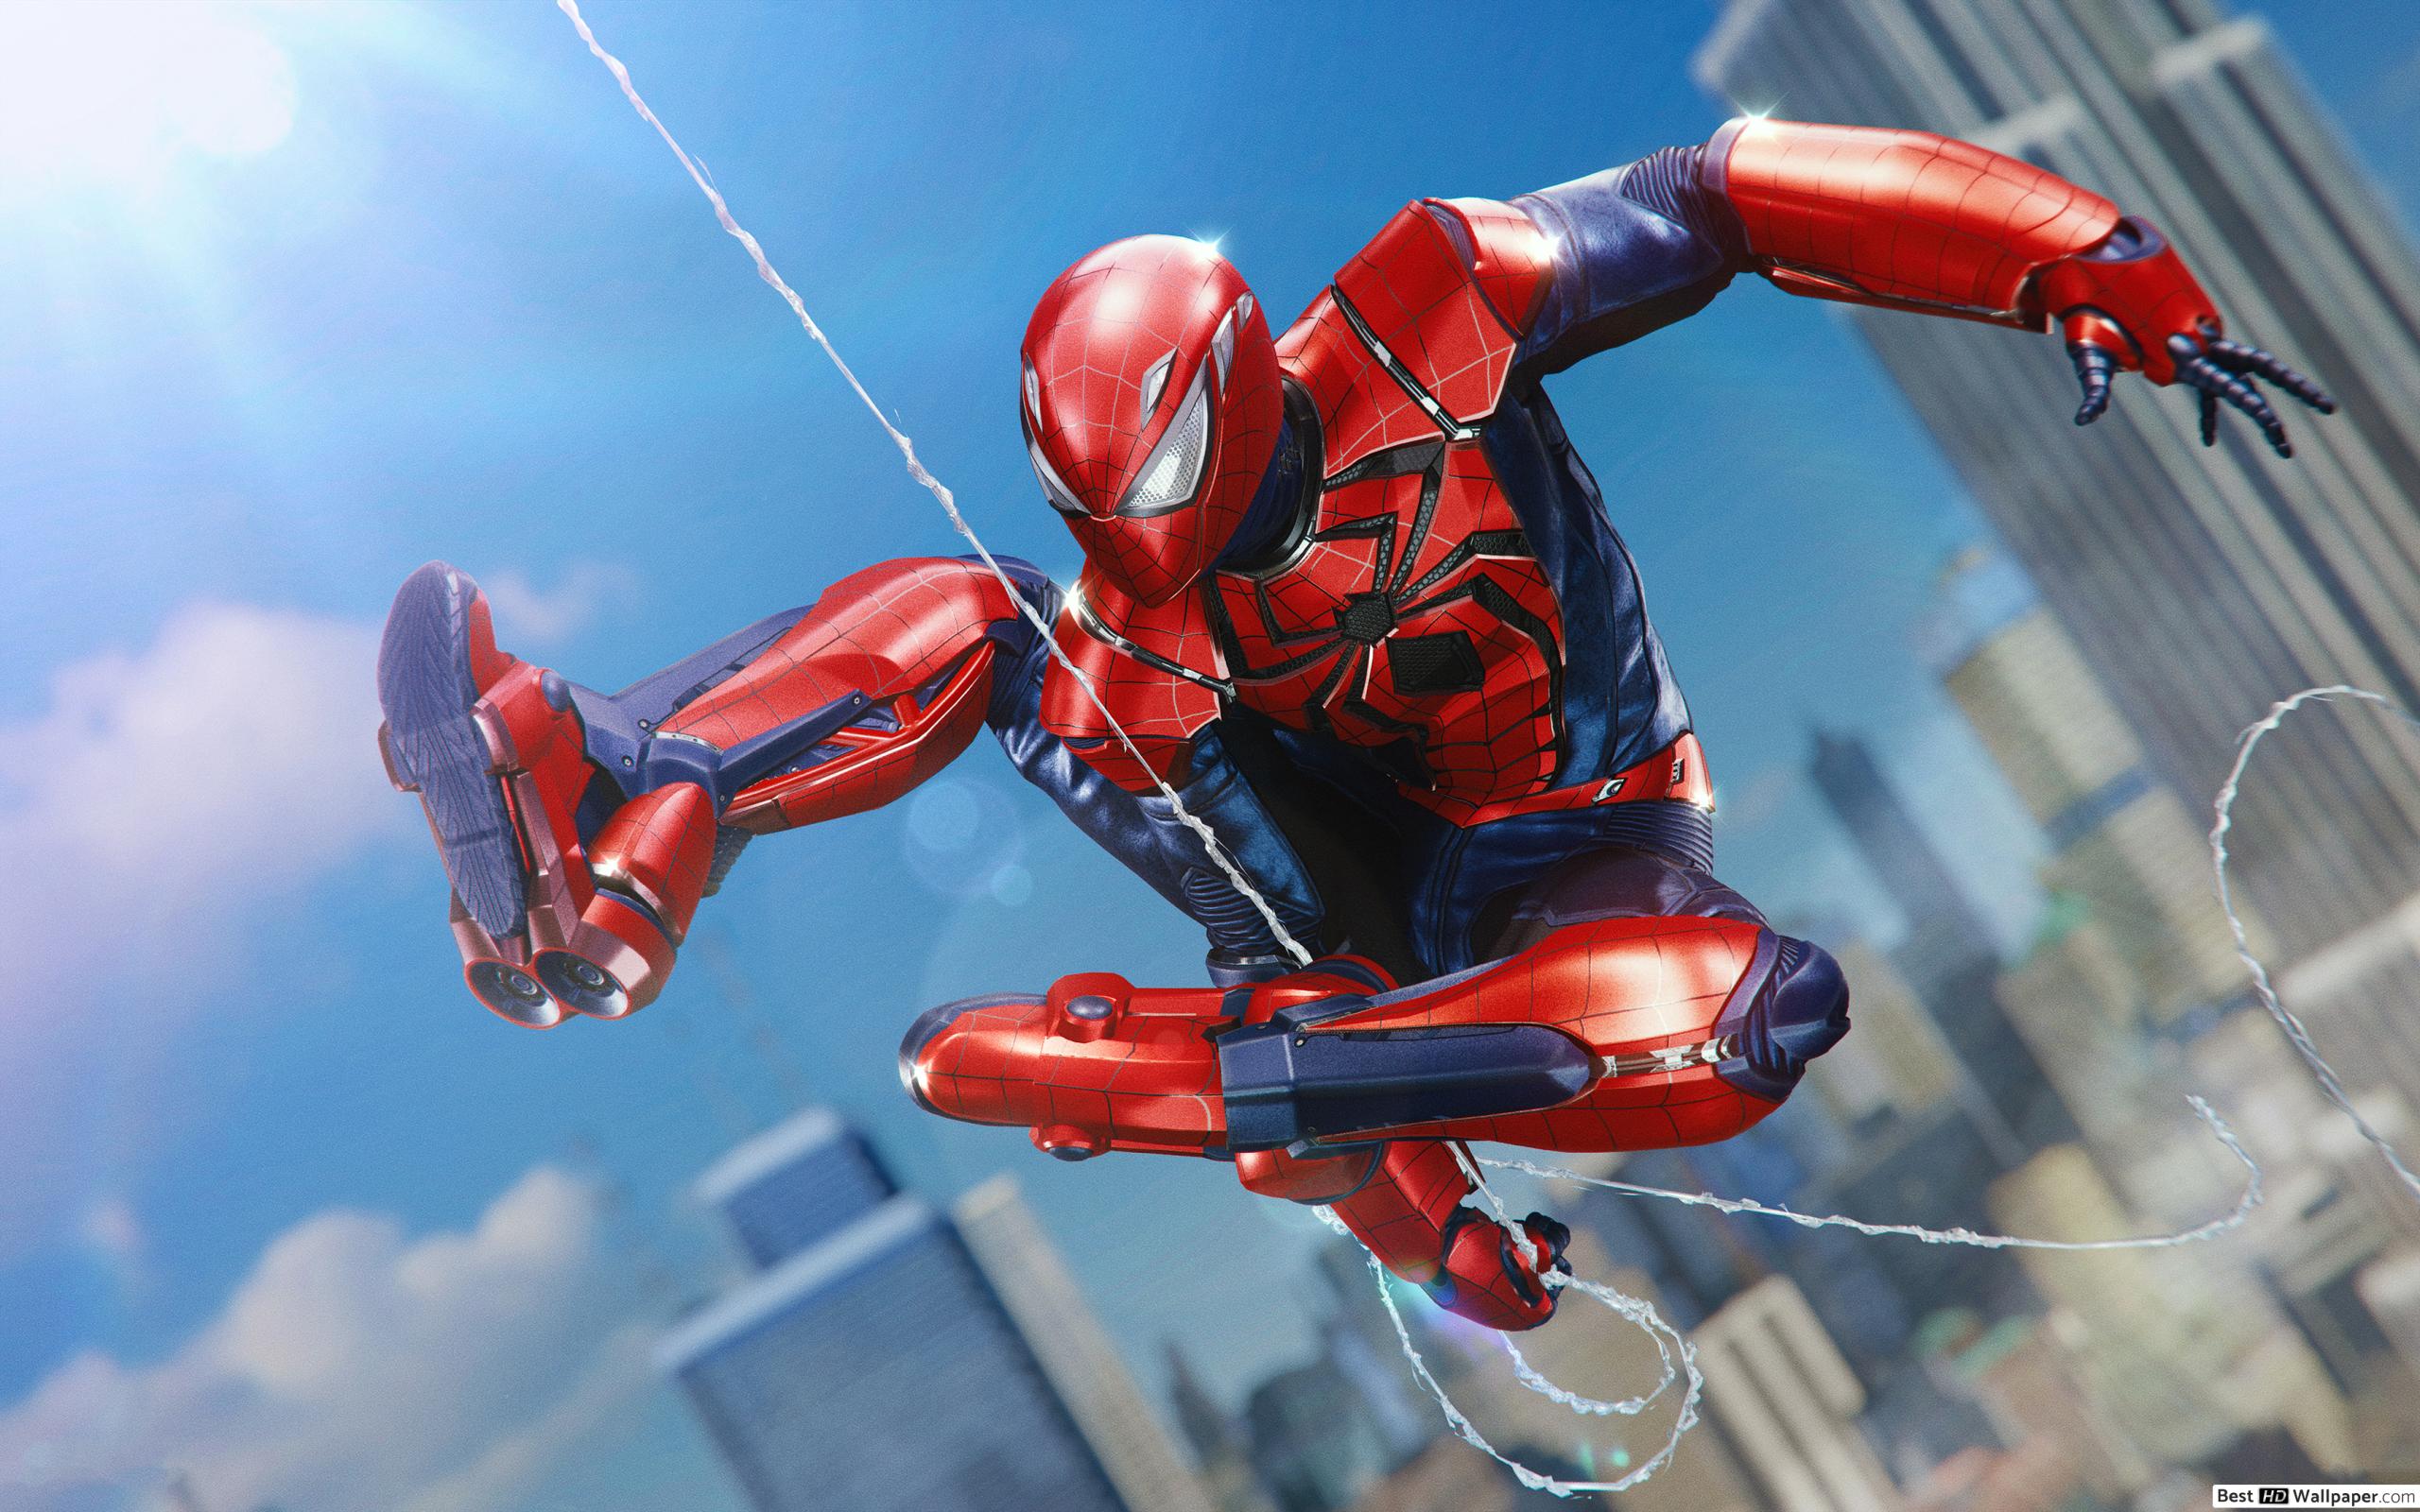 Spider Man Ps4 All Suits - 2560x1600 Wallpaper 